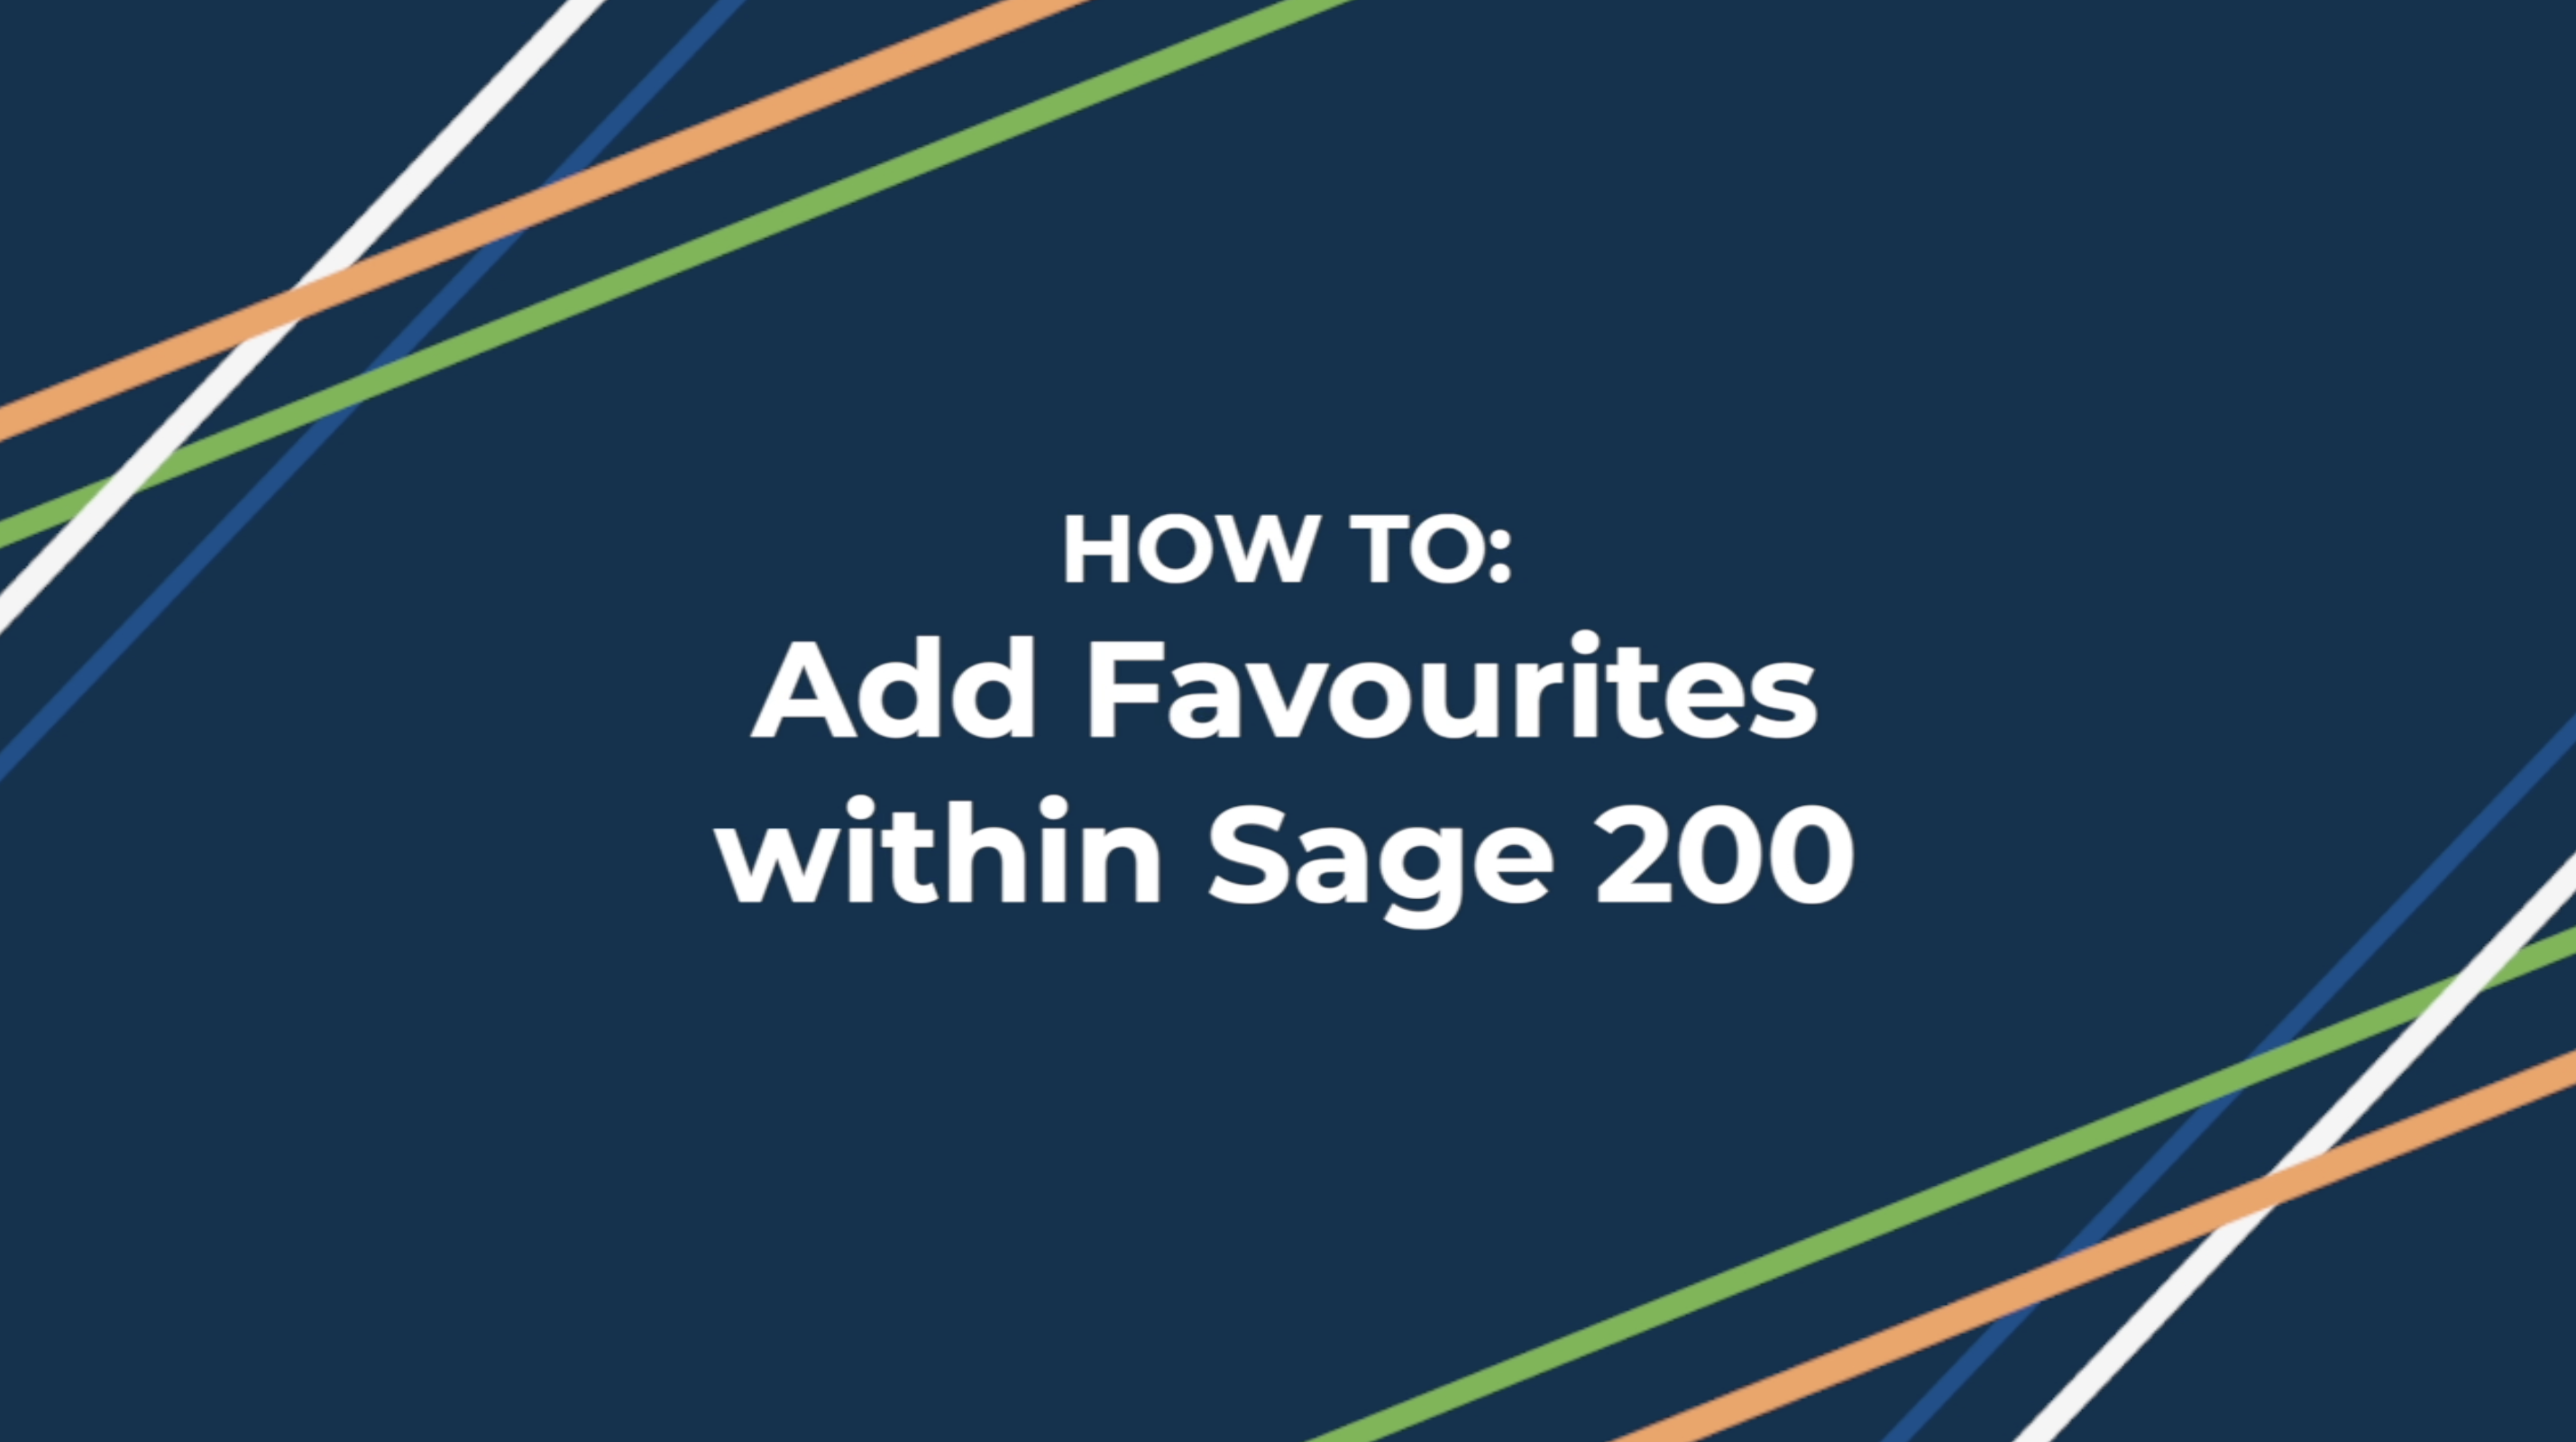 Add favourites within Sage 200